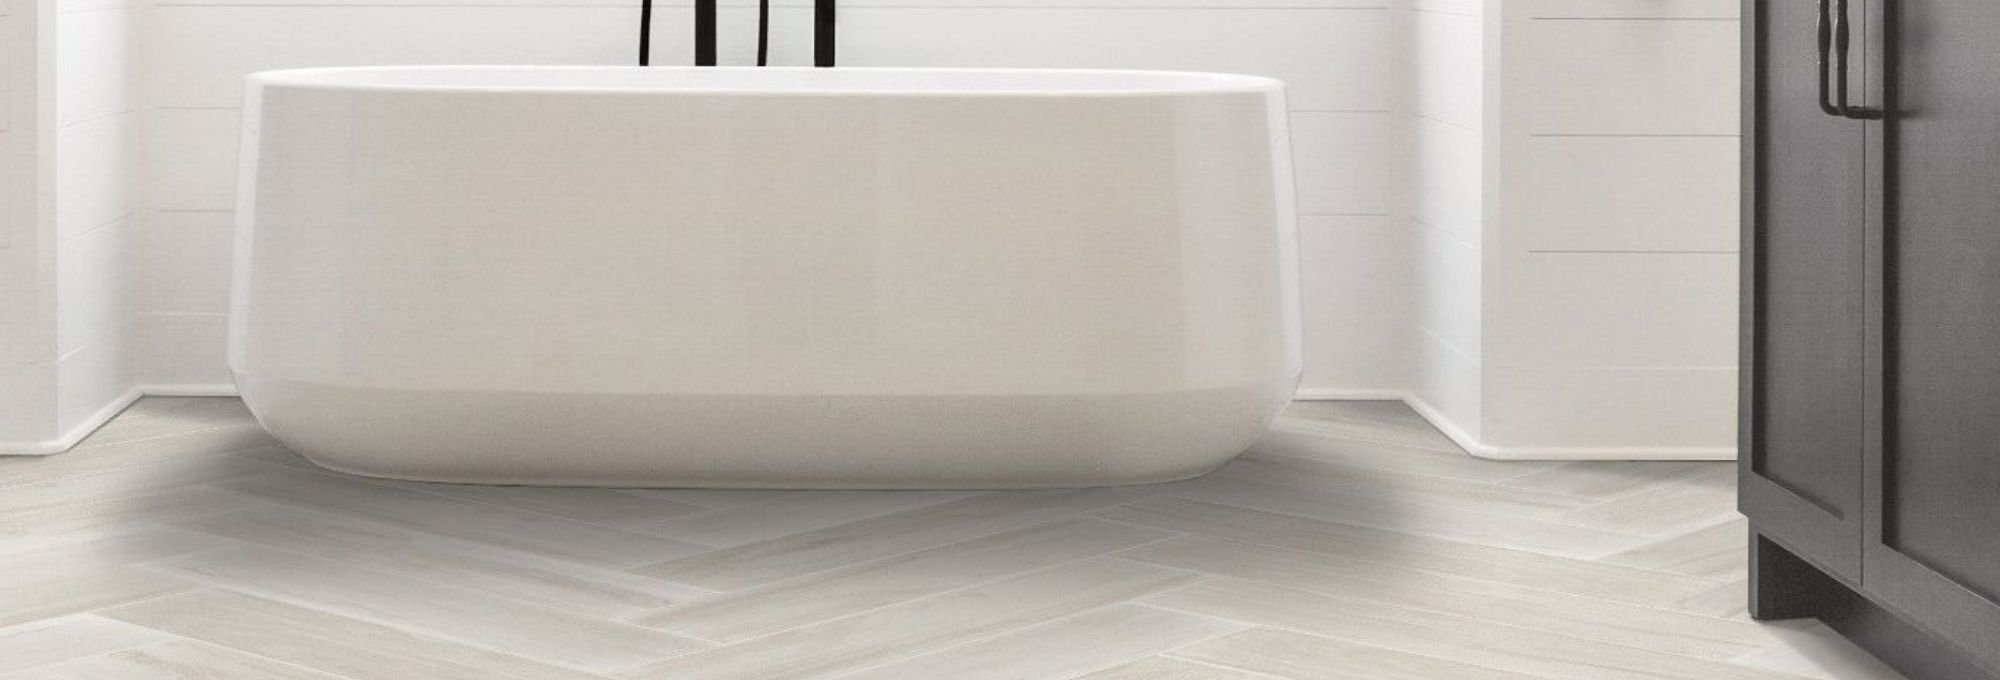 white bathtub in bathroom with white tile floor in herringbone style from Wholesale Flooring and Blinds in Casper, WY